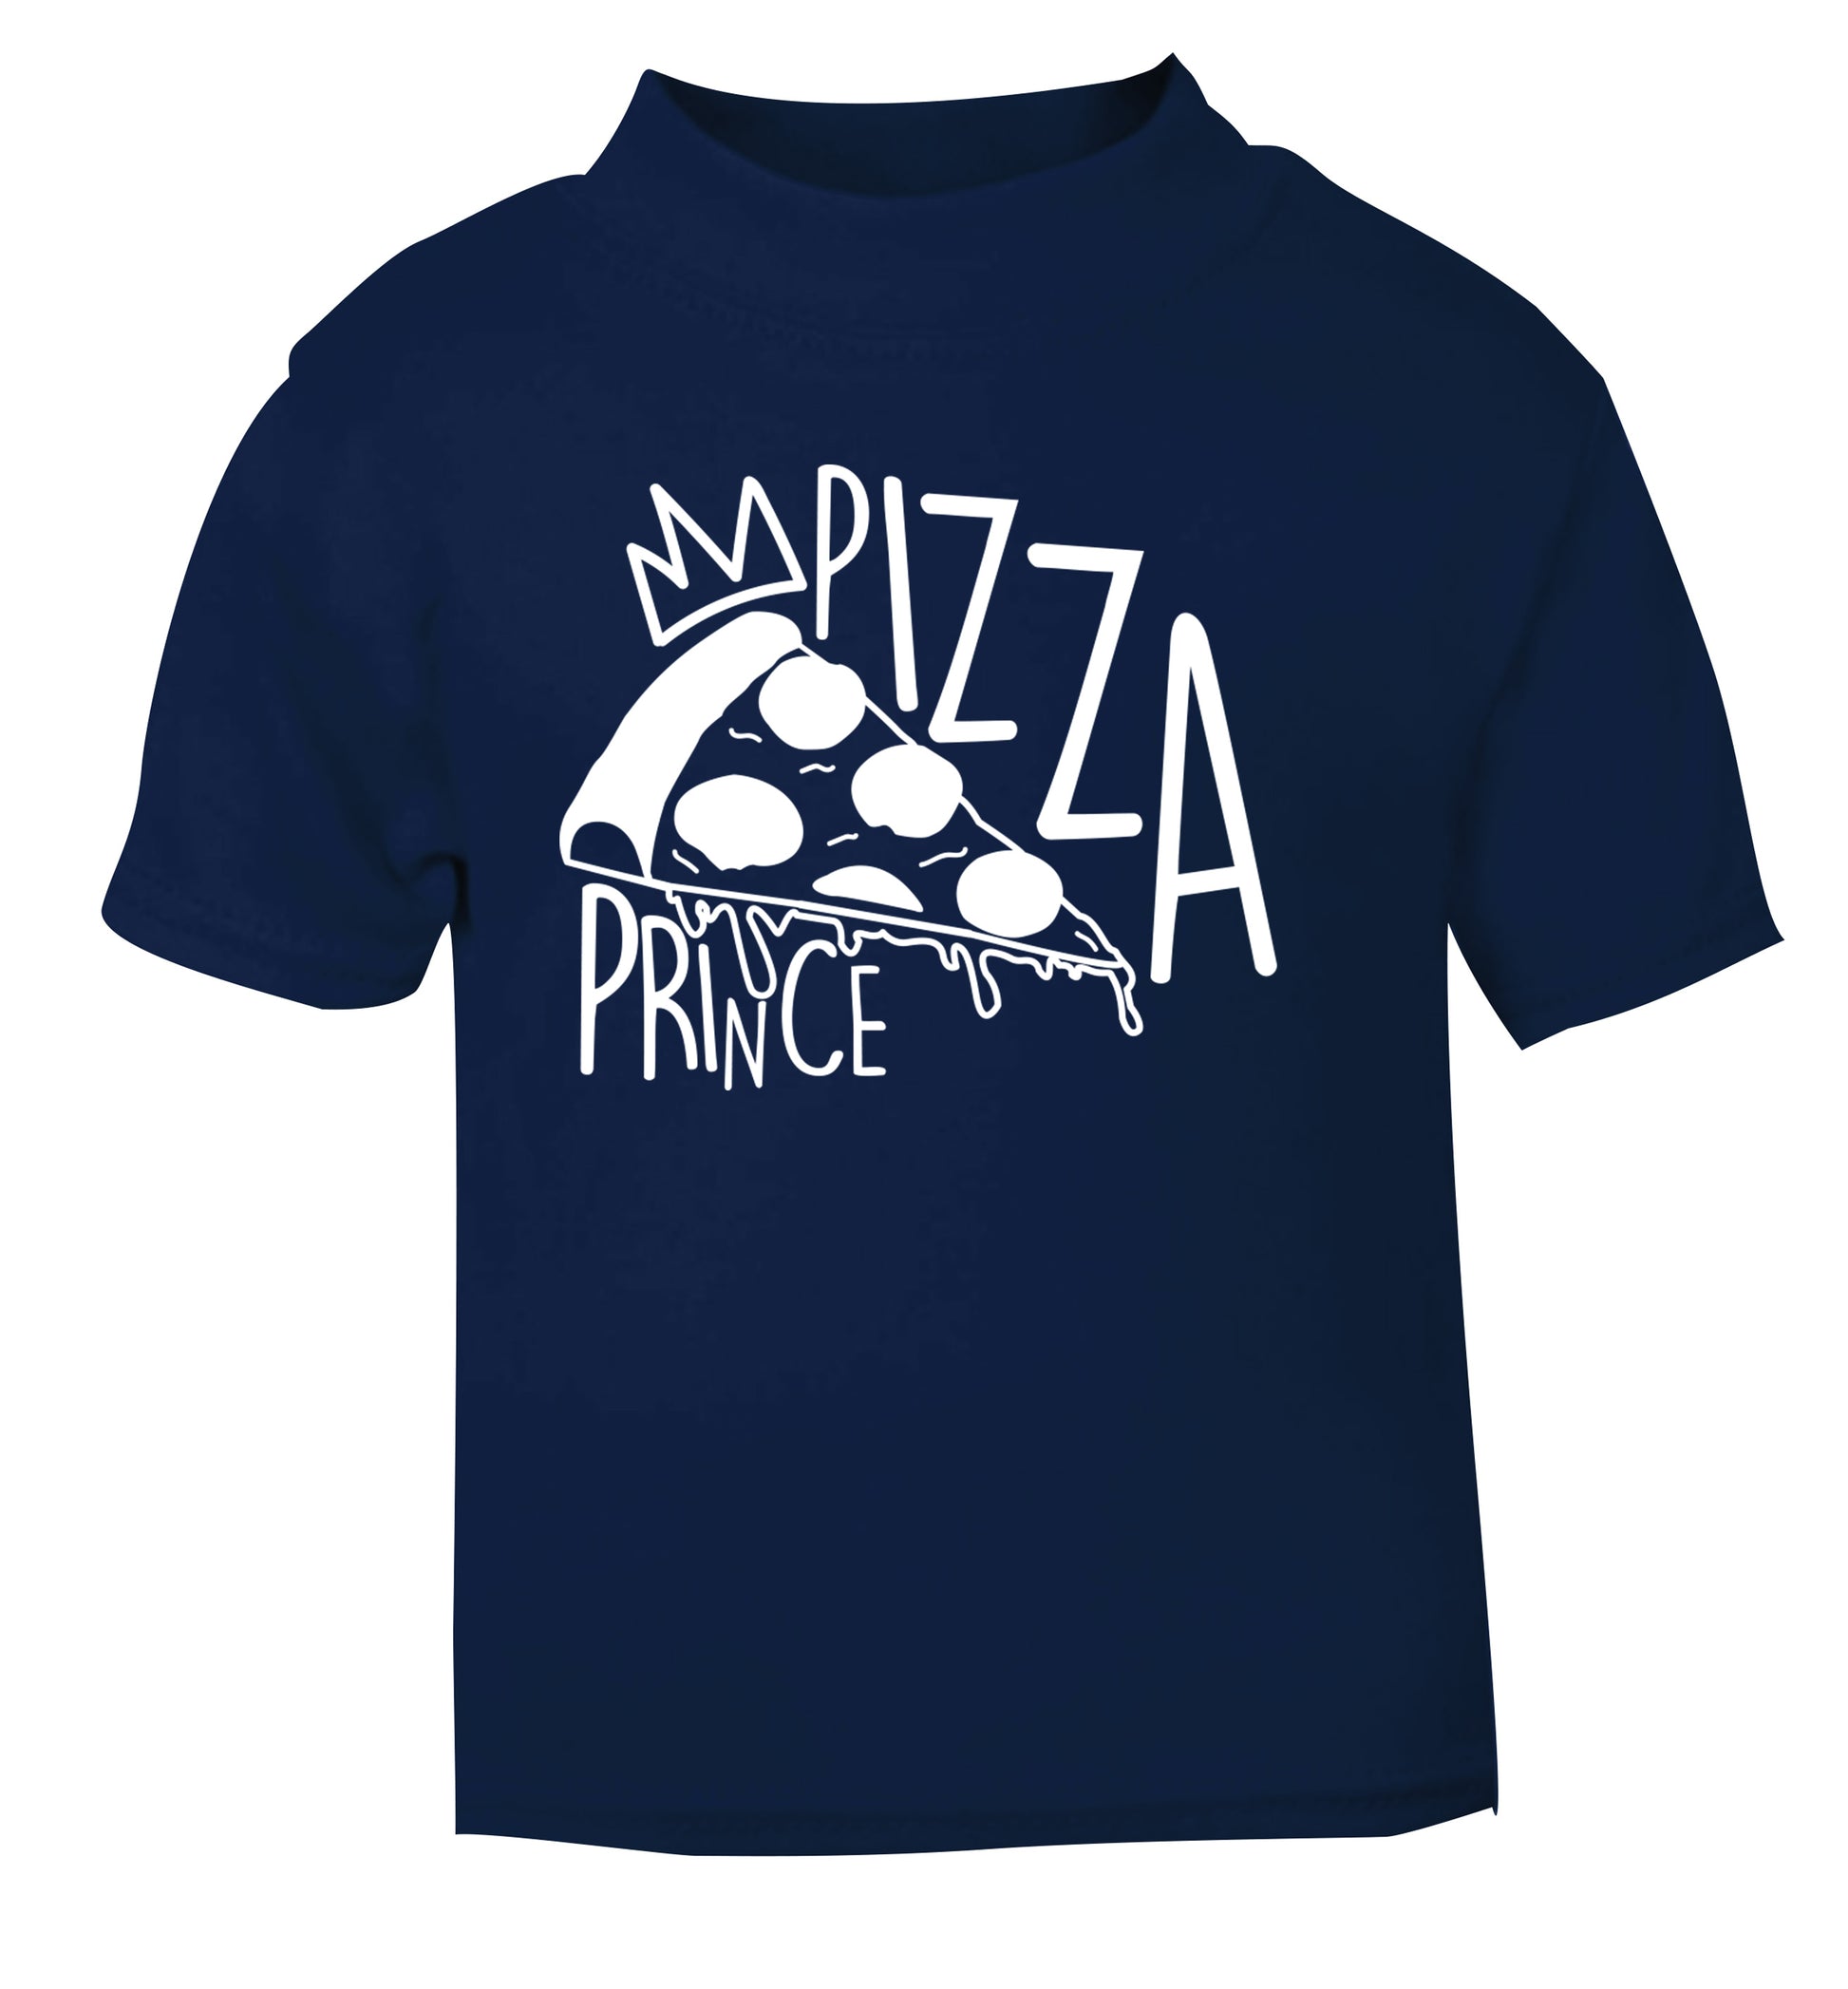 Pizza Prince navy Baby Toddler Tshirt 2 Years